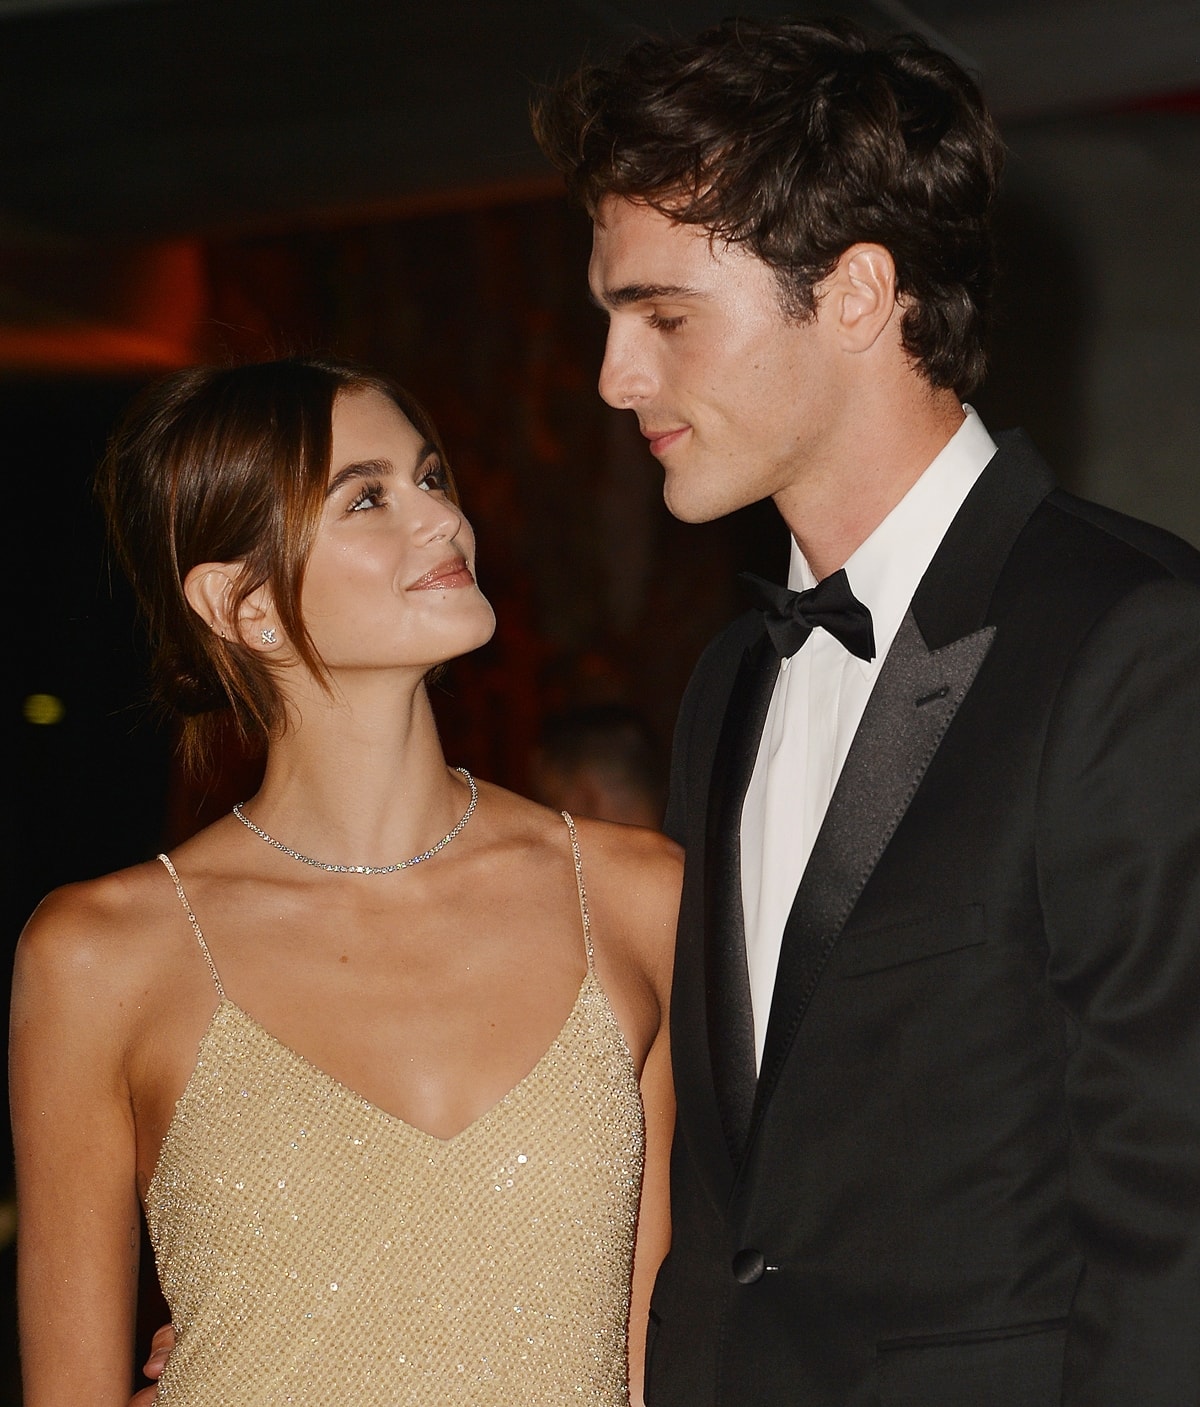 Kaia Gerber and Jacob Elordi dated for about a year and split in late 2021